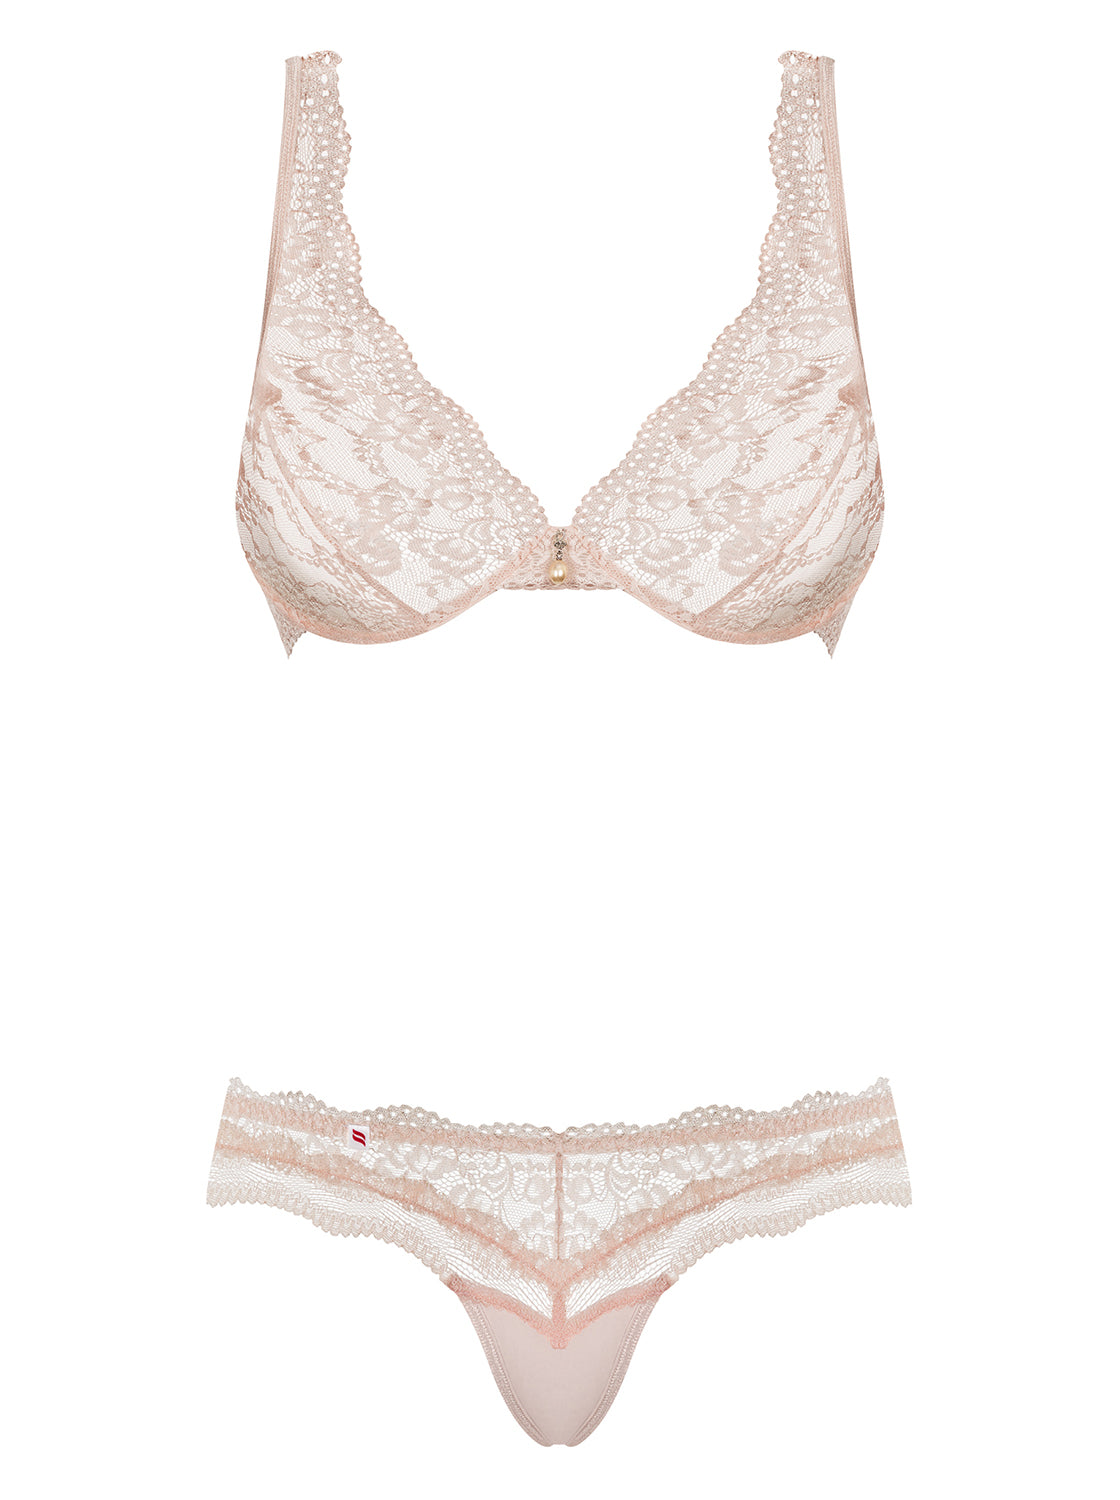 Luvae a sensual lingerie set, a bra with underwire cups and a matching lace panties